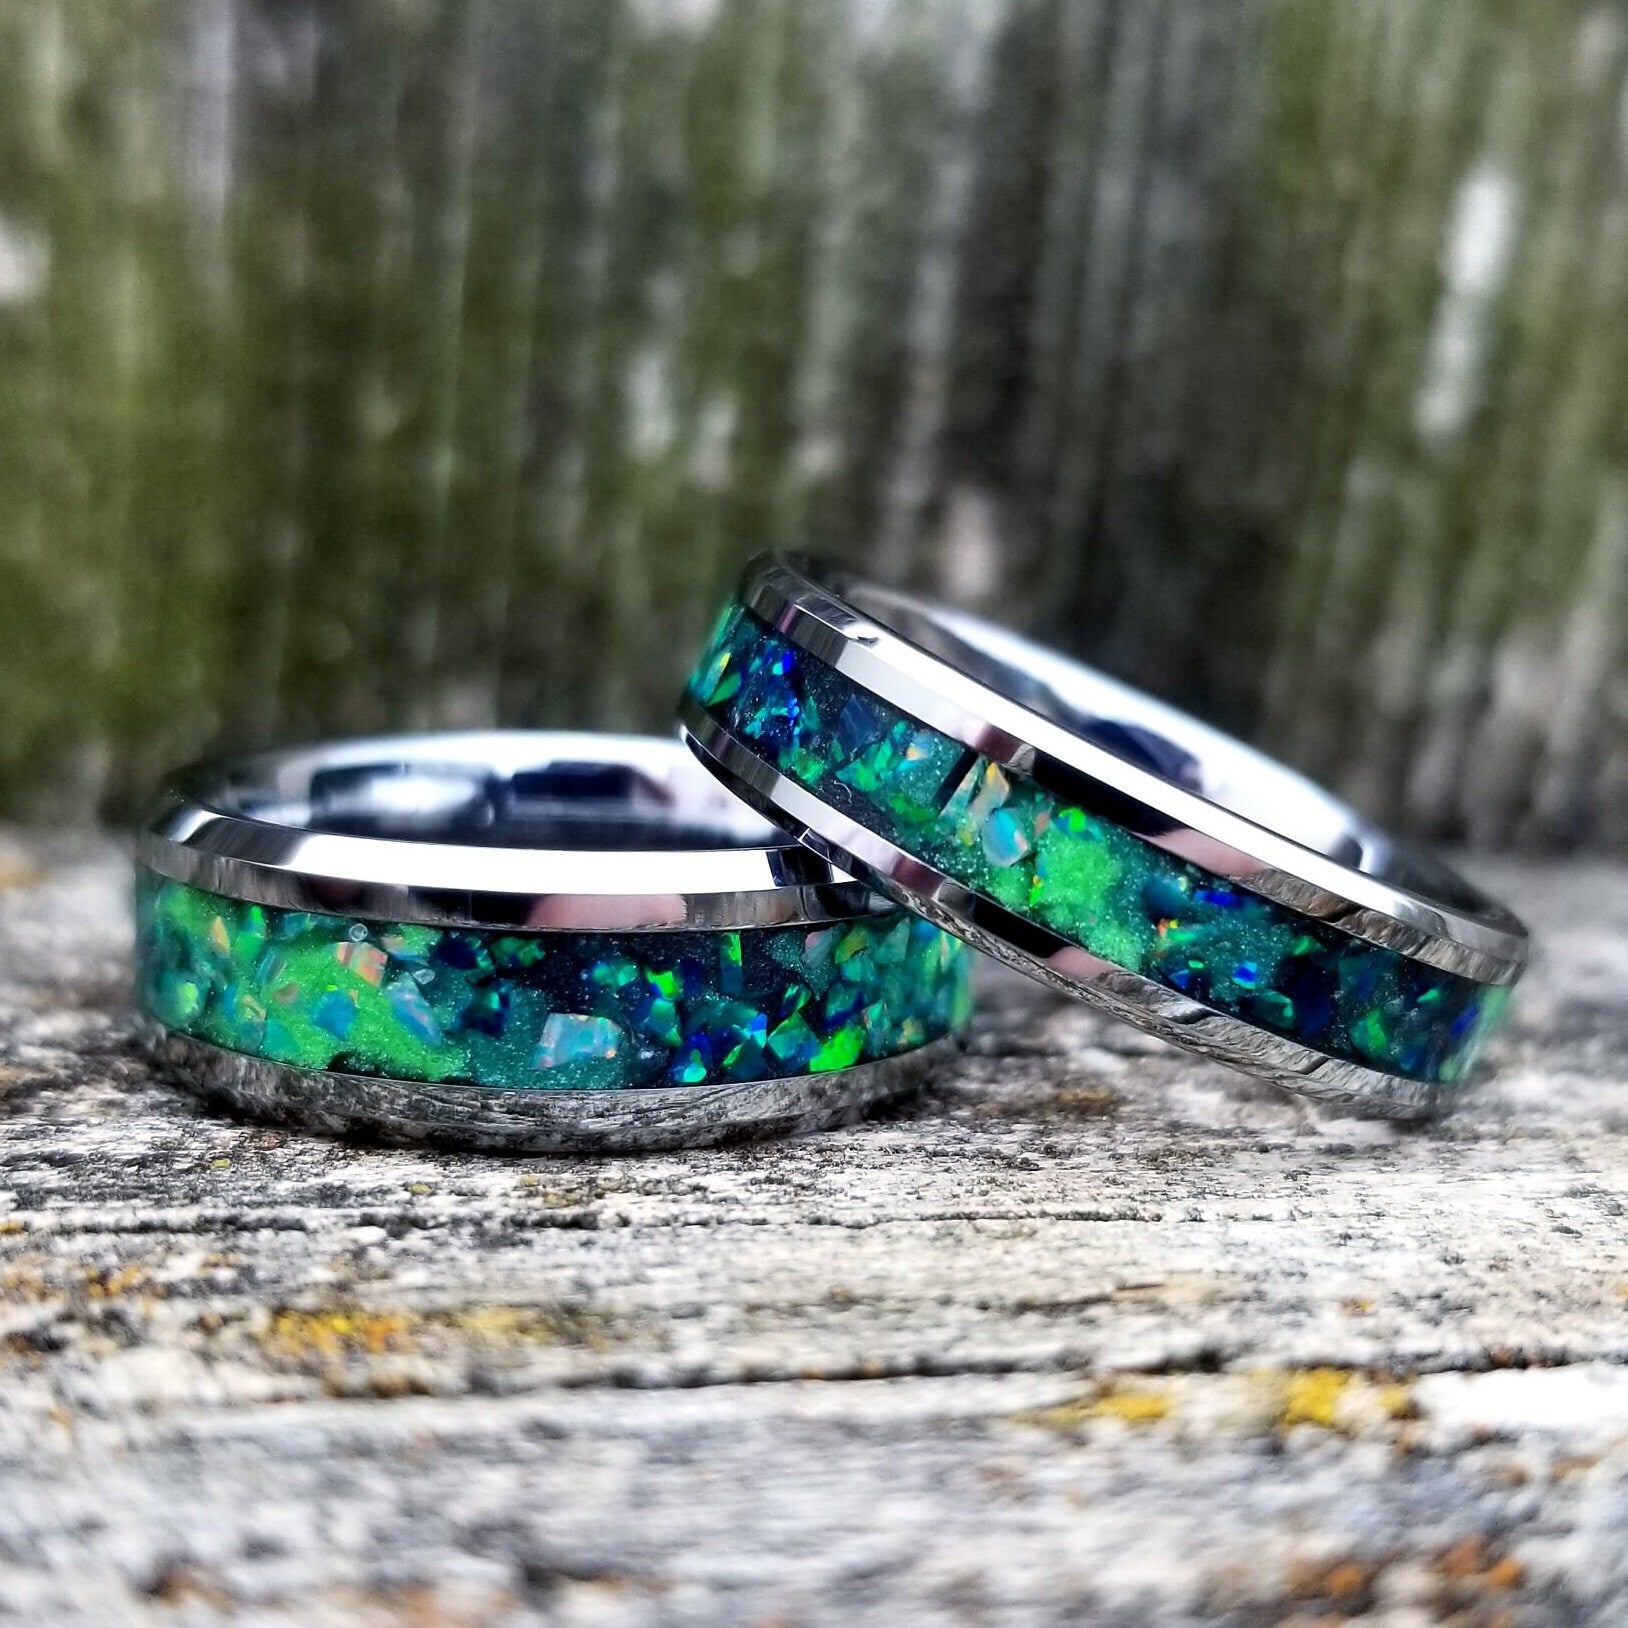 His & Hers Wedding Ring Set- Tungsten Carbide Ring Set with Green Fire Opal & Glowstone Inlay - 8mm & 6mm Rings - Sizes 5-13 - Orth Custom Rings